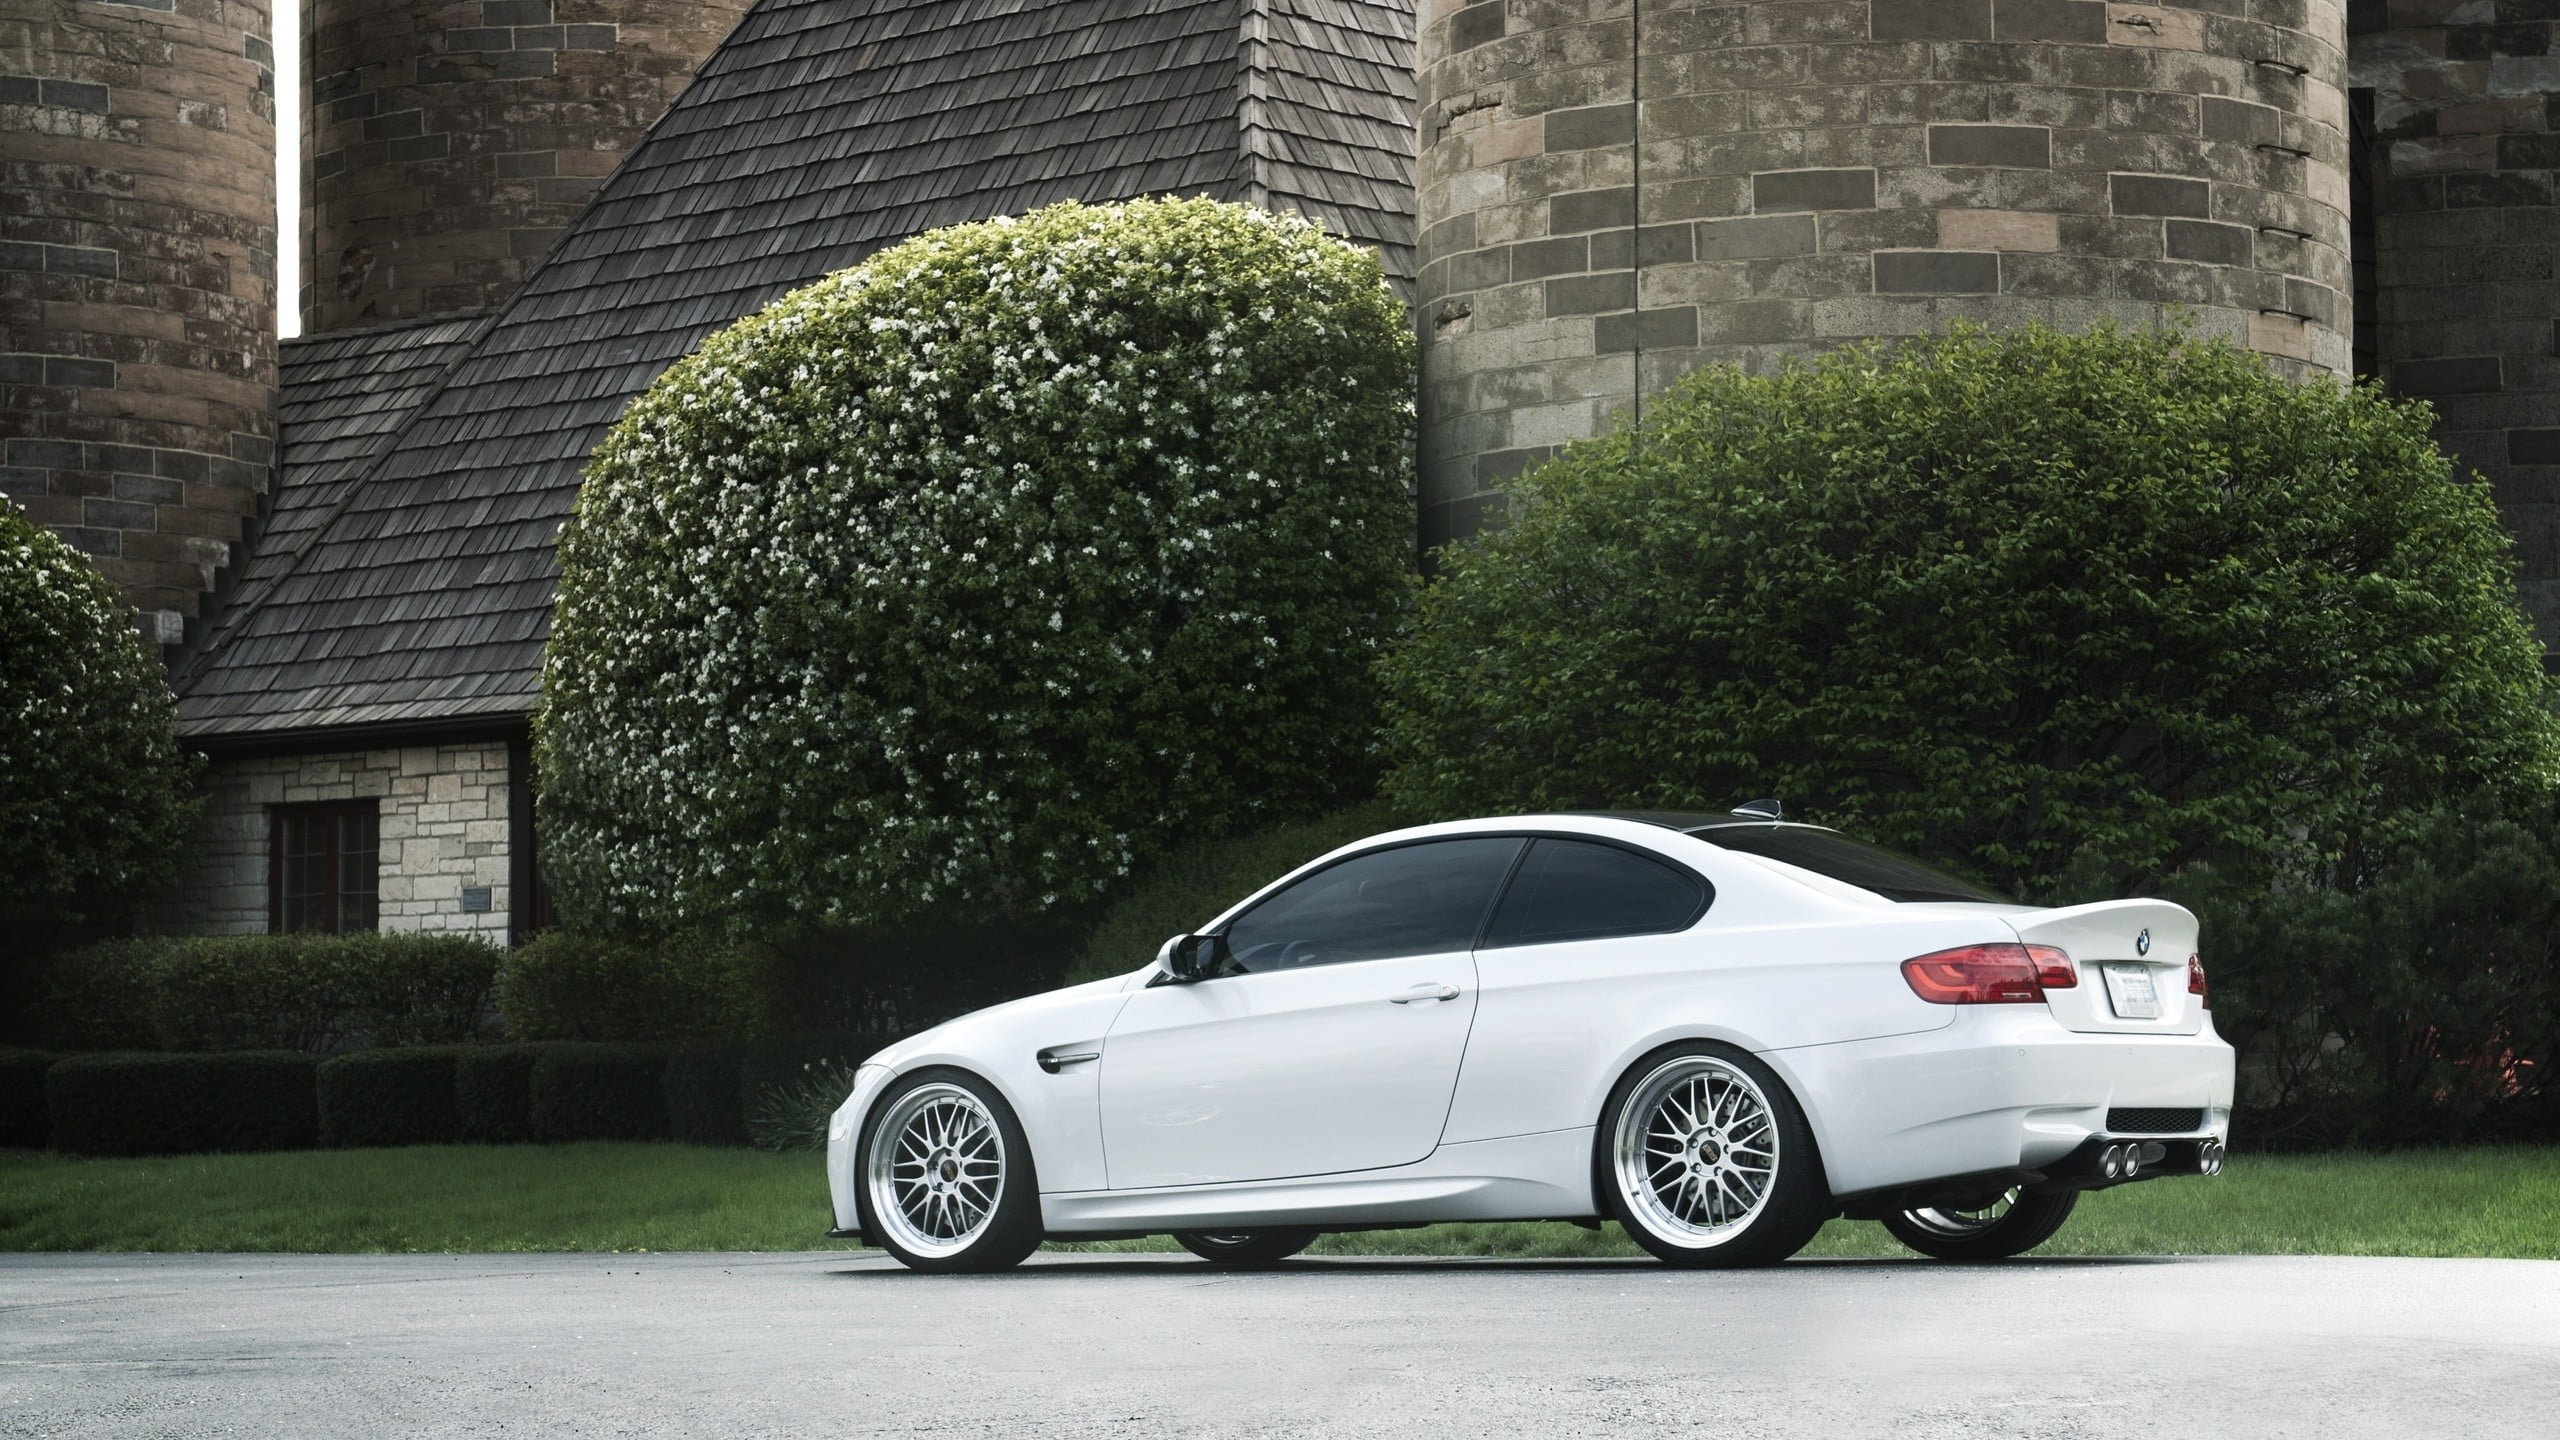 Bmw White Car Wallpapers Rev Up Your Screens With Stunning Car Wallpapers